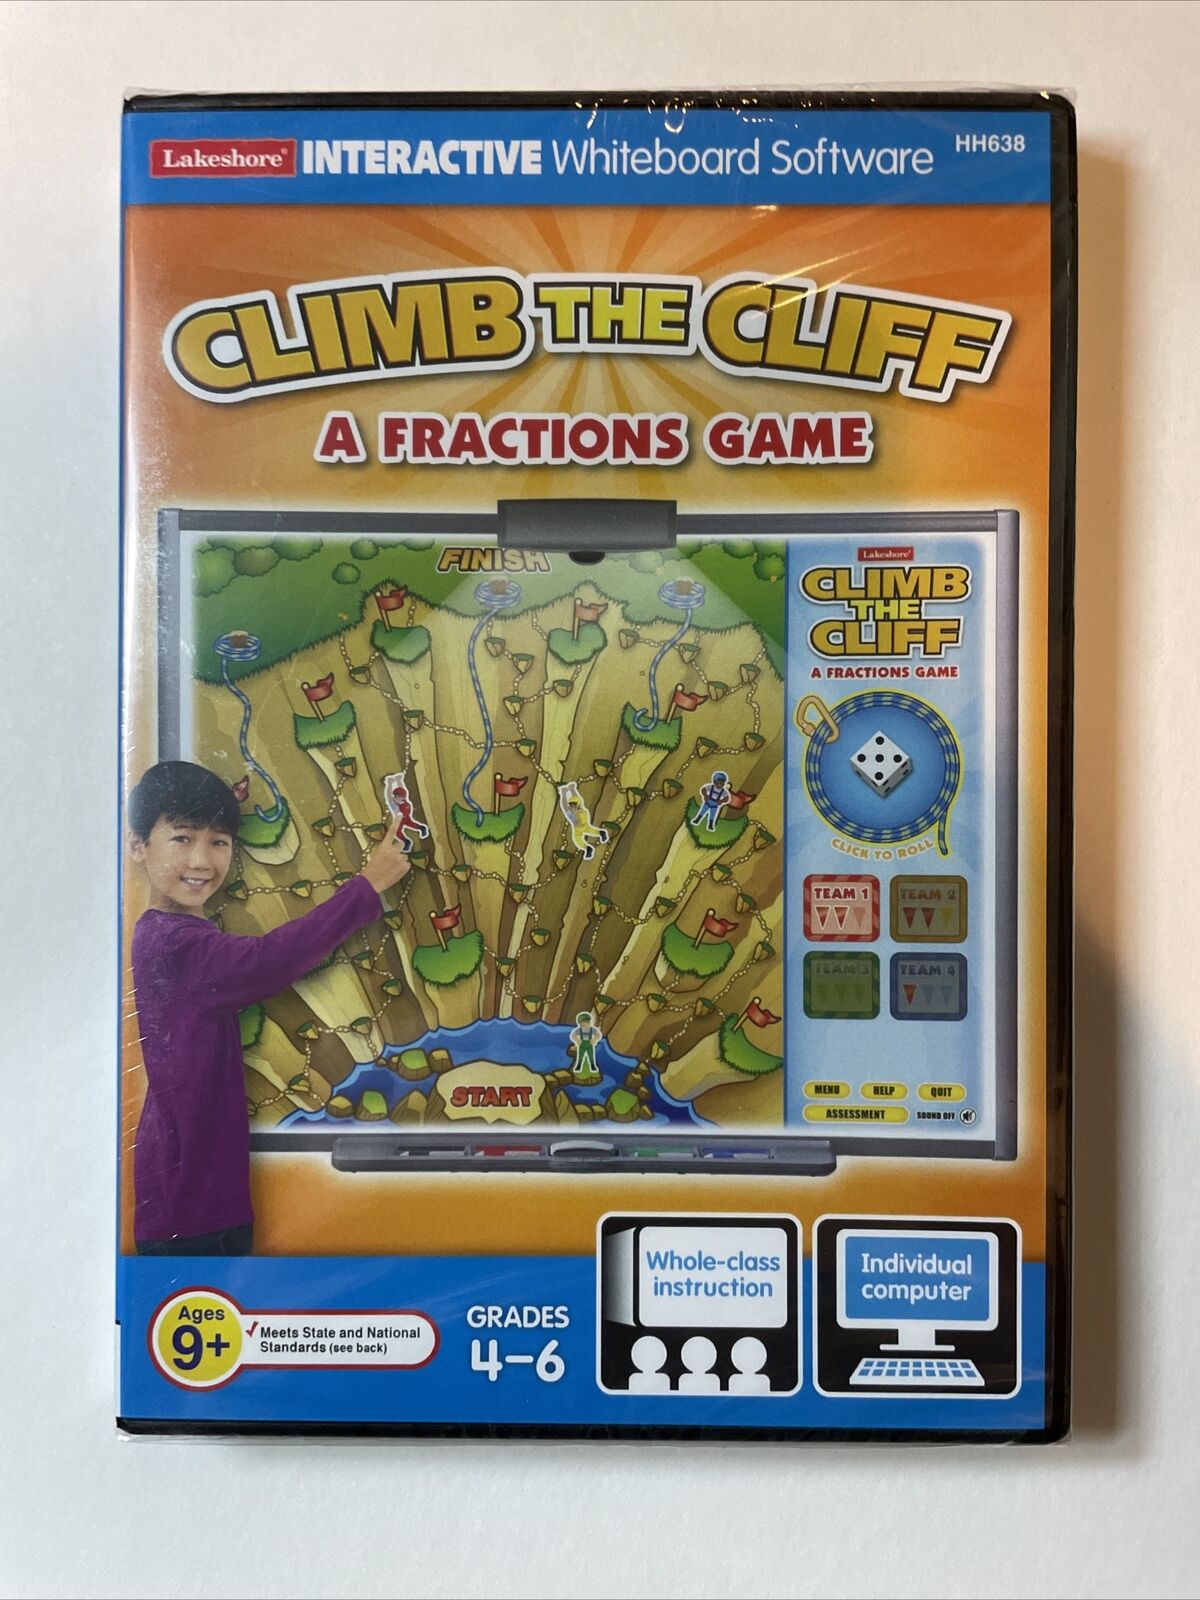 Lakeshore Interactive Whiteboard Software PC Climb Cliff Fractions